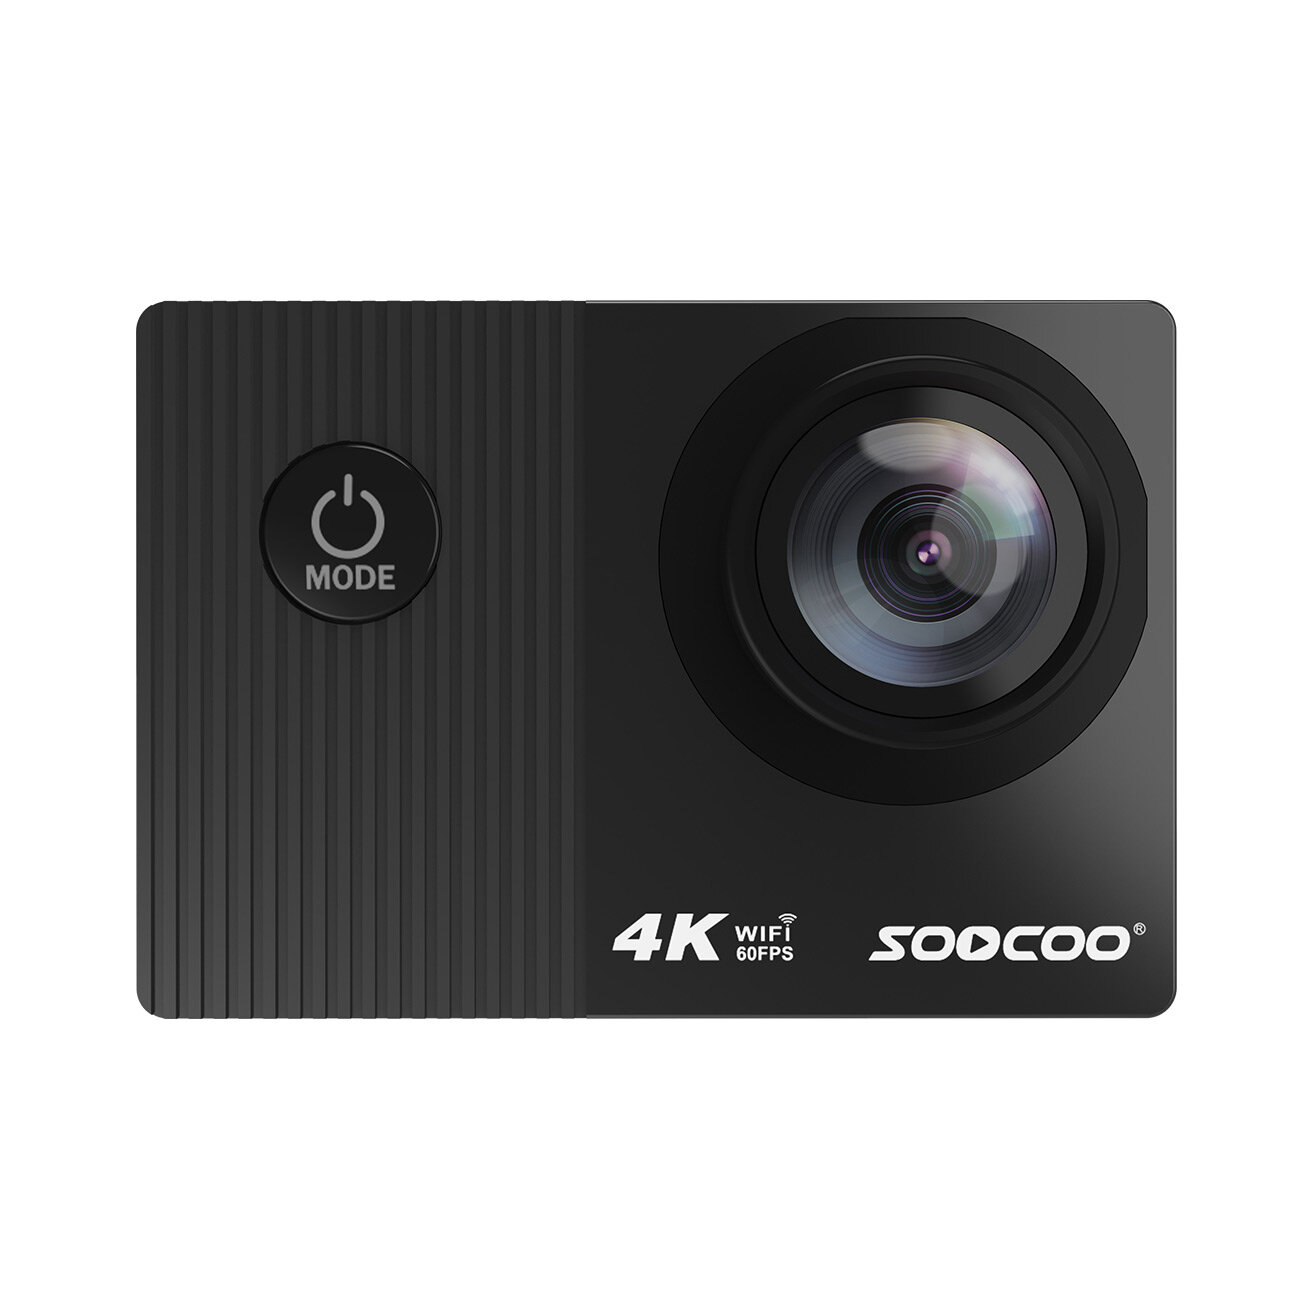 

SOOCOO F91R Ultra HD 4K 60fps Remote Control WIFI Action Camera Underwater Waterproof Video Sports Camera with Touch Scr